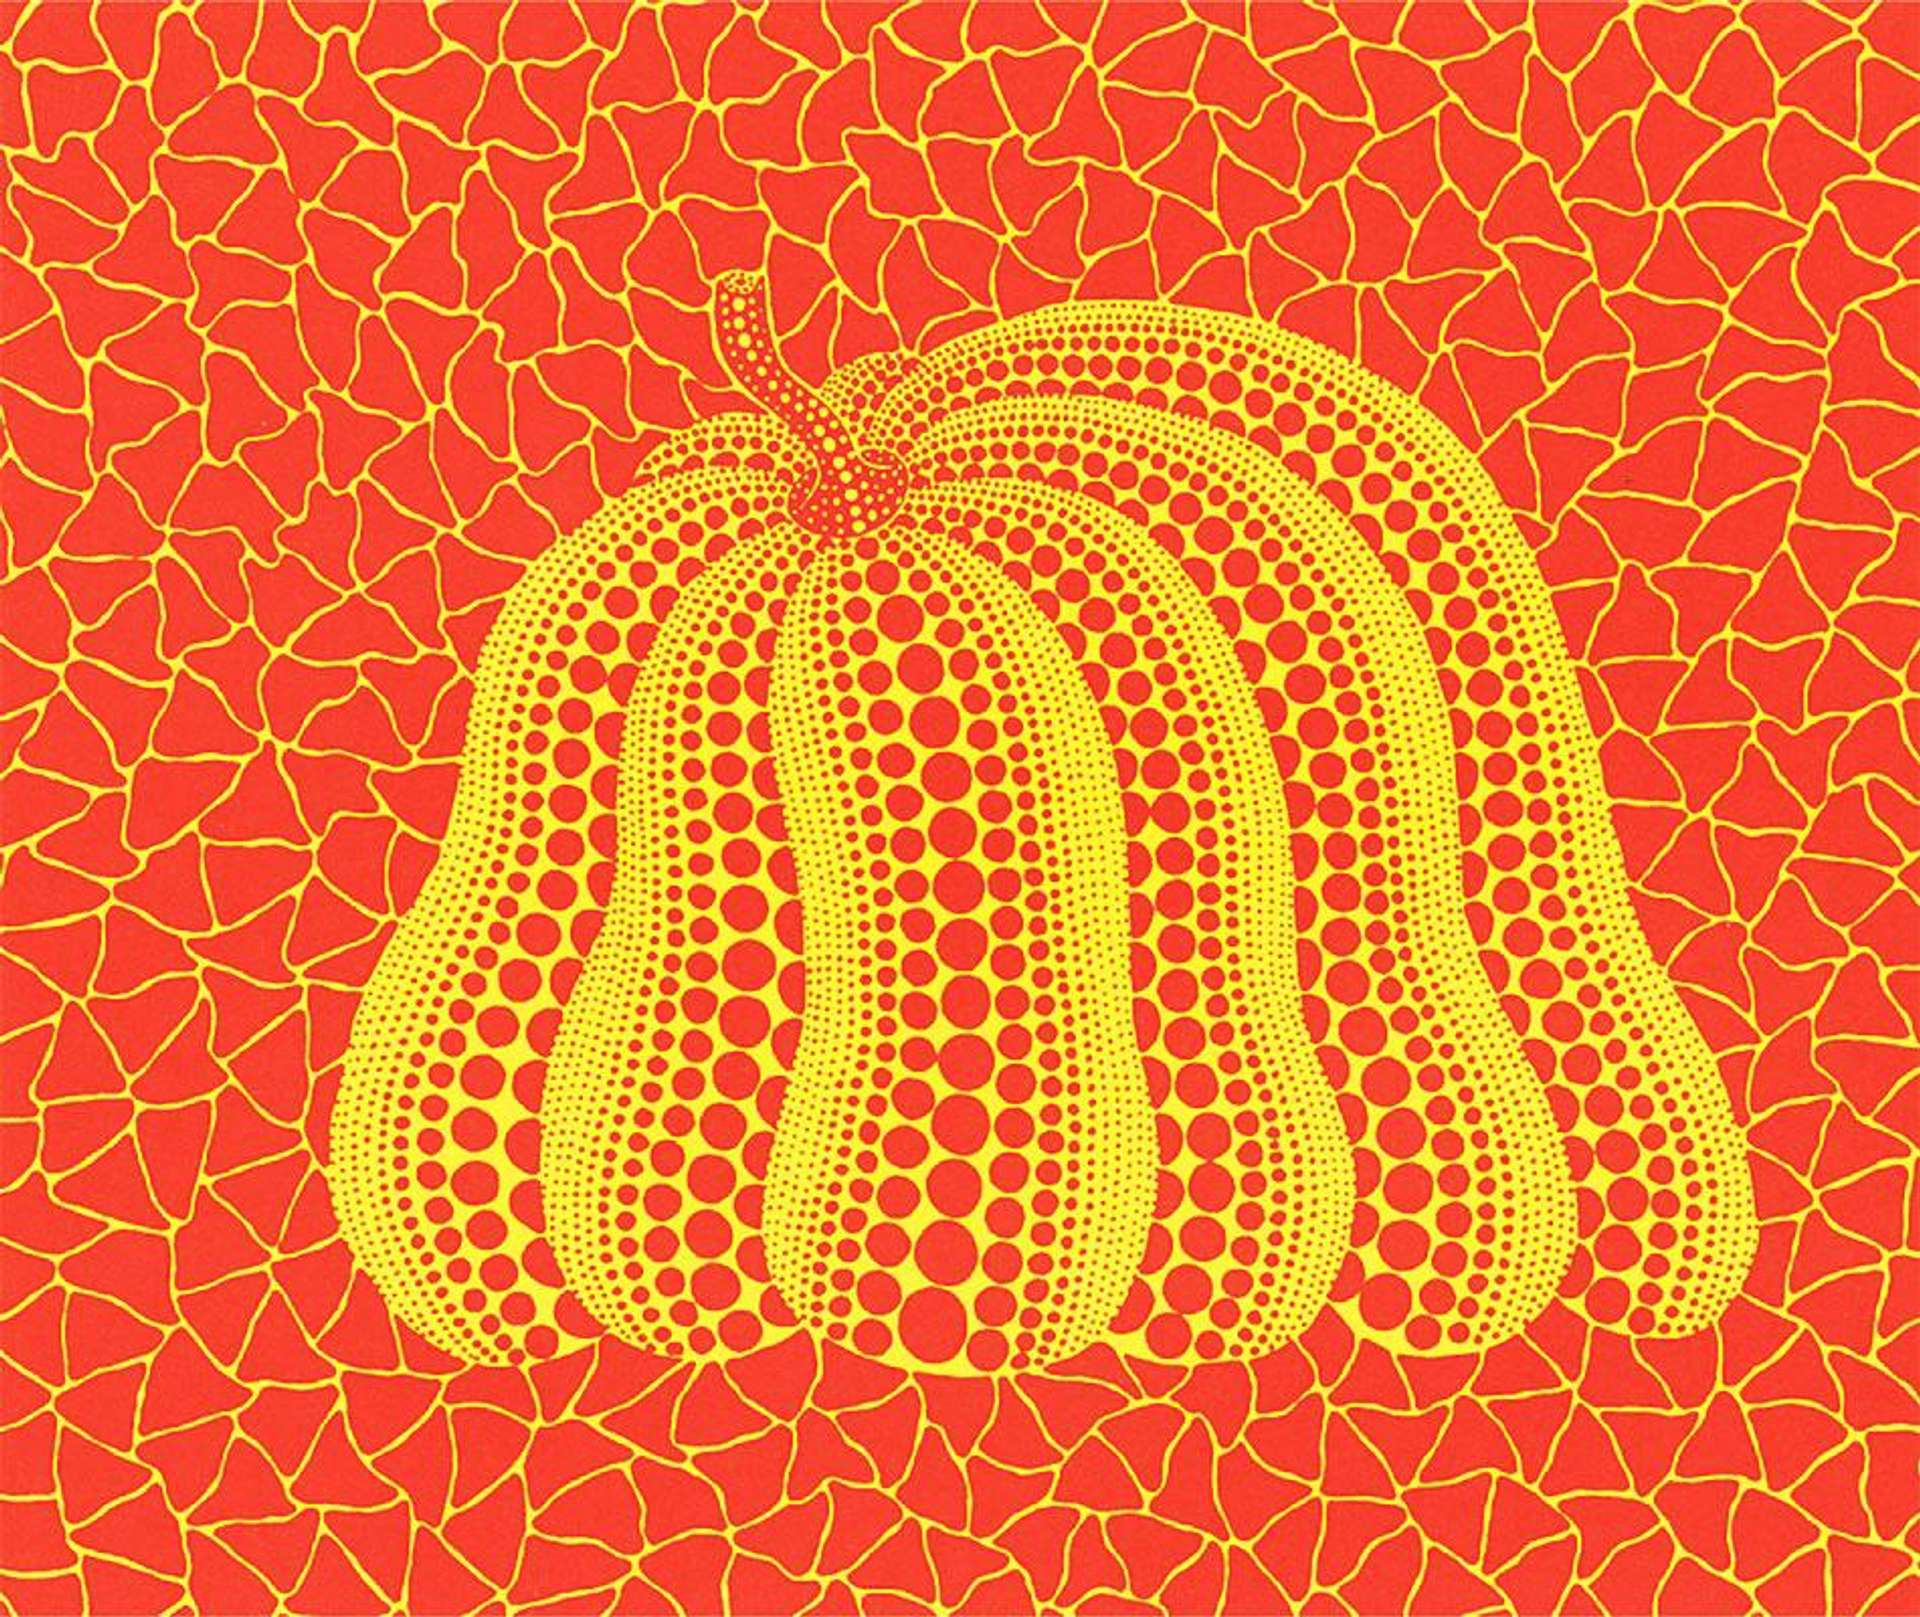 A screenprint by Yayoi Kusama depicting a yellow pumpkin at the centre of an orange background.